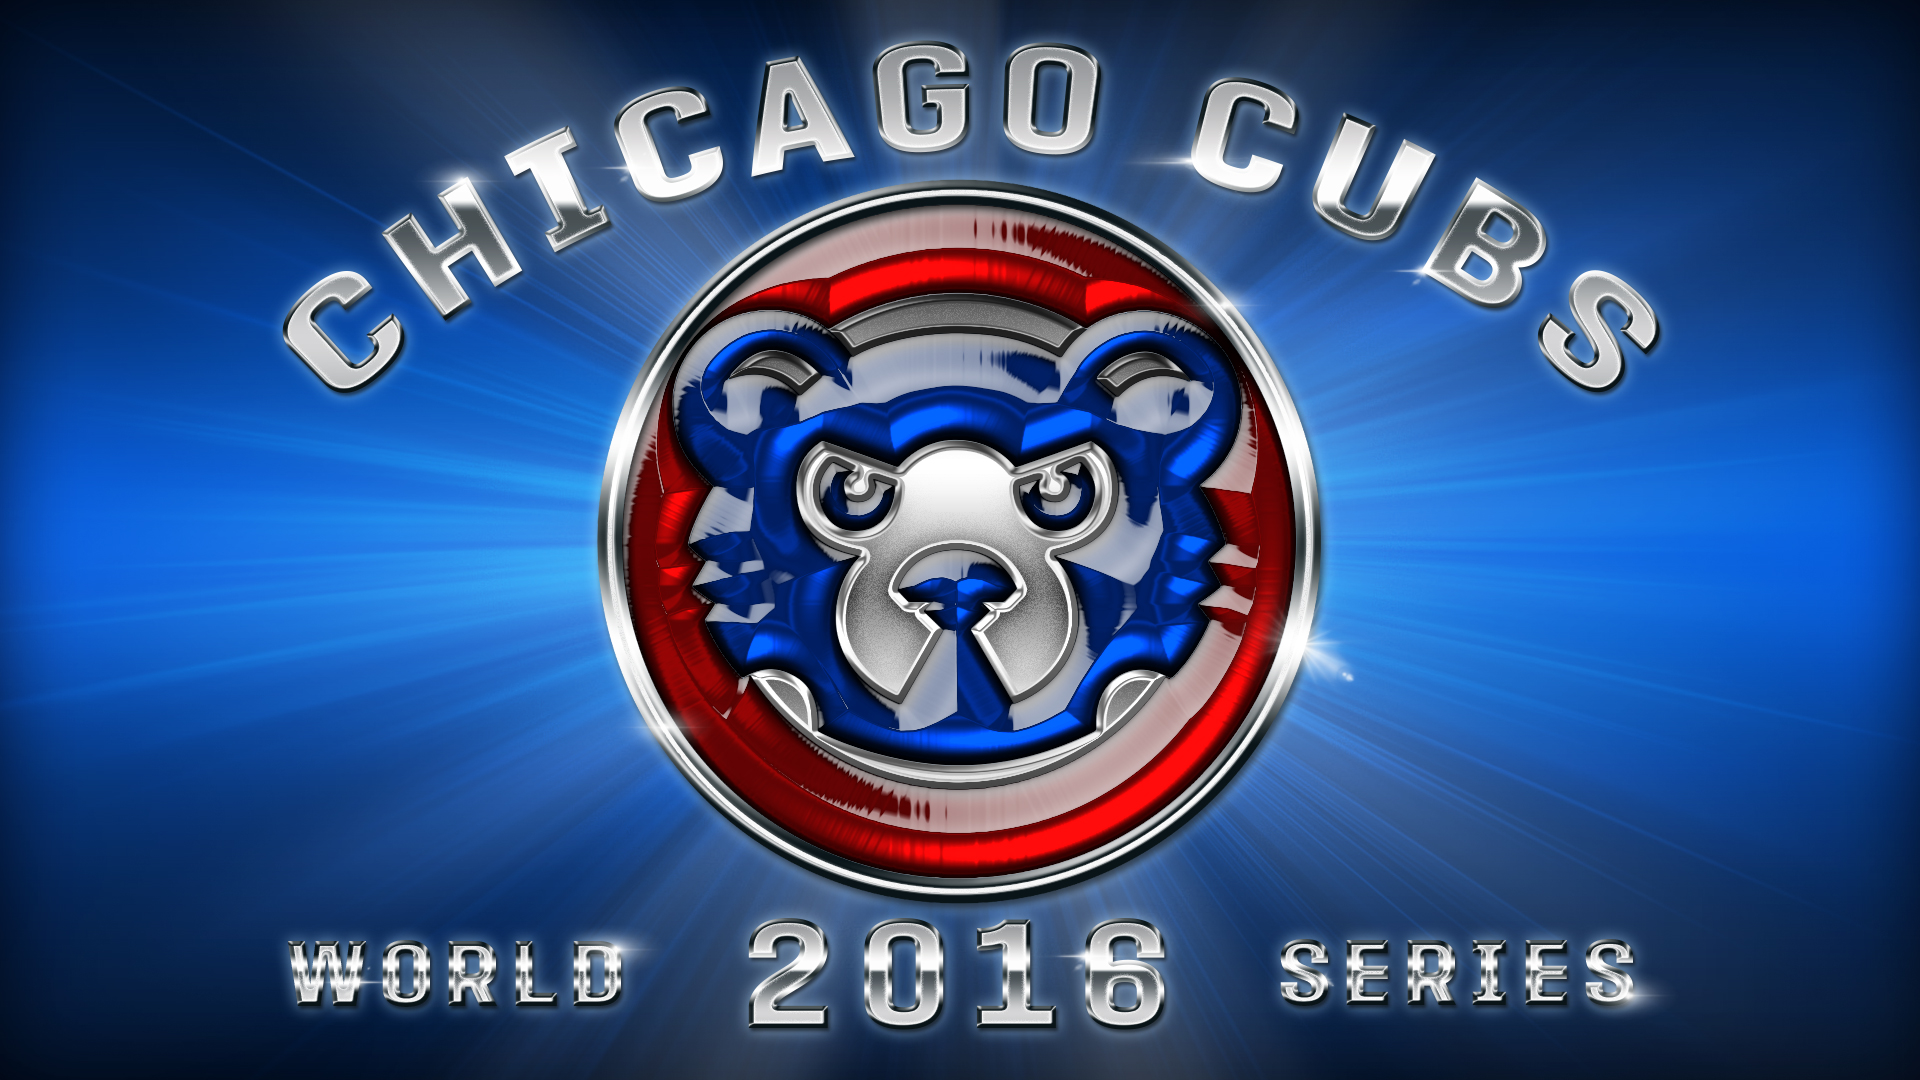 HD cubs win wallpapers